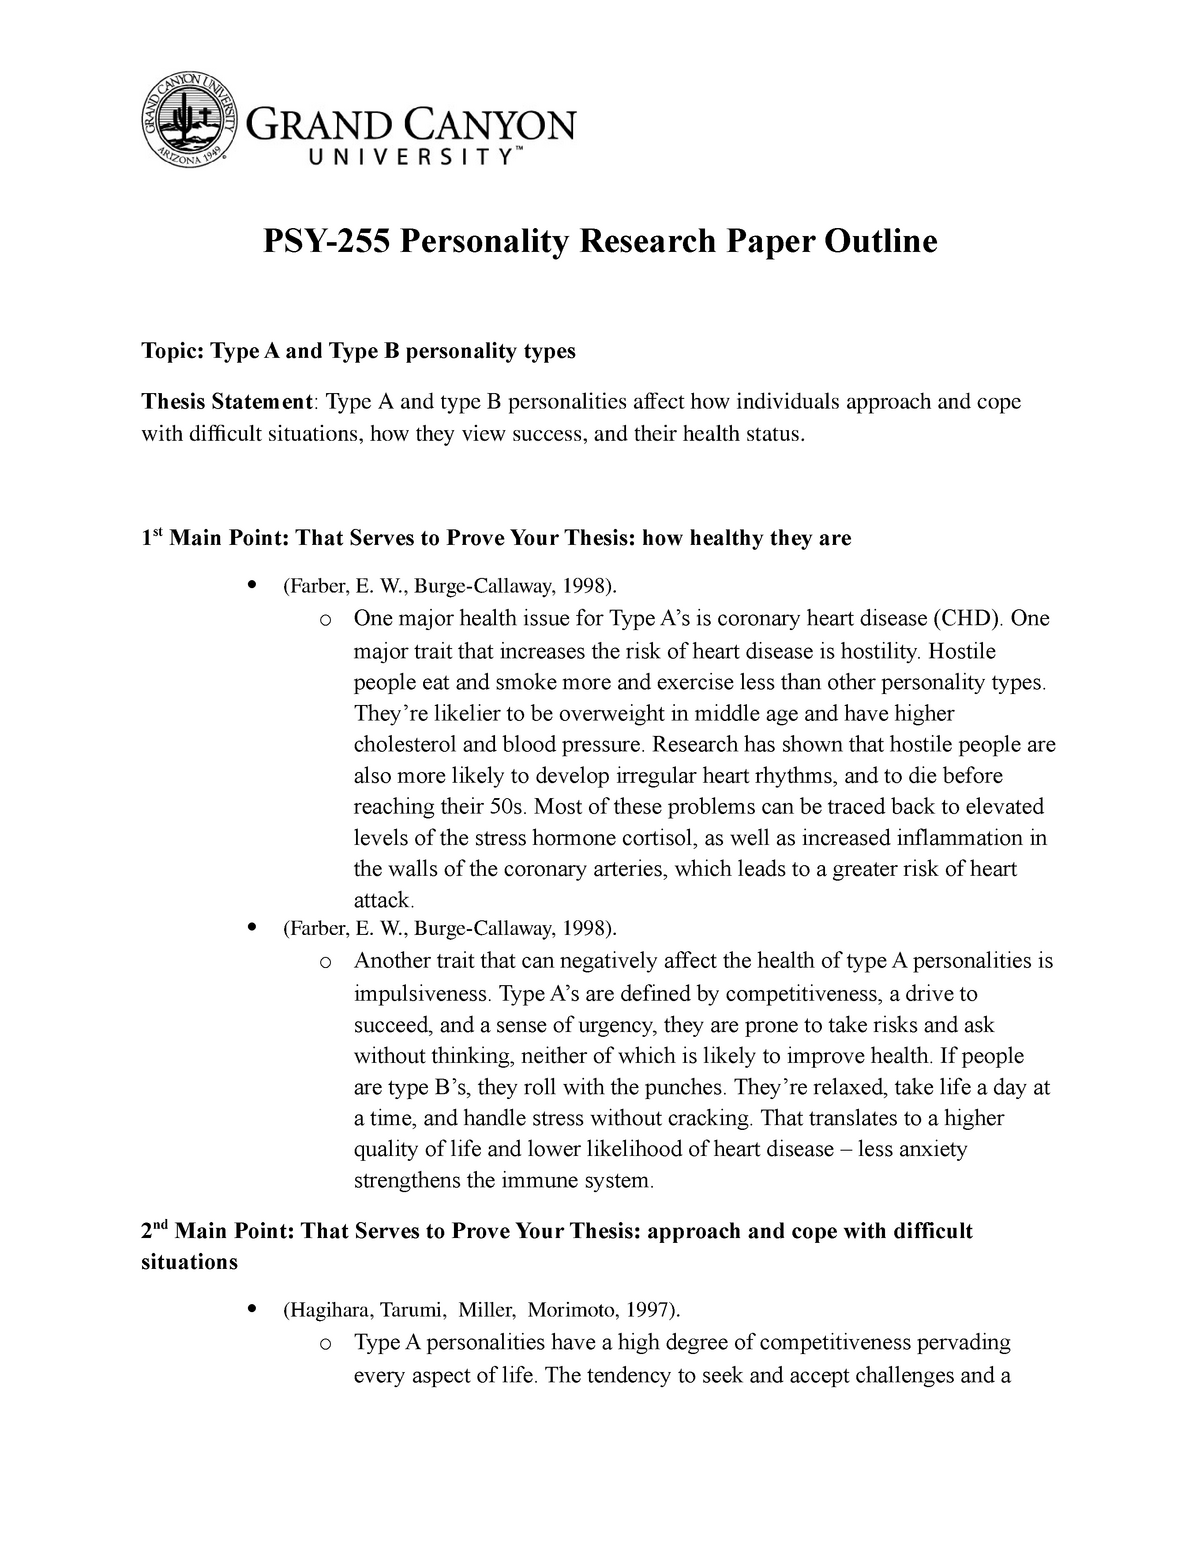 types of personality research paper